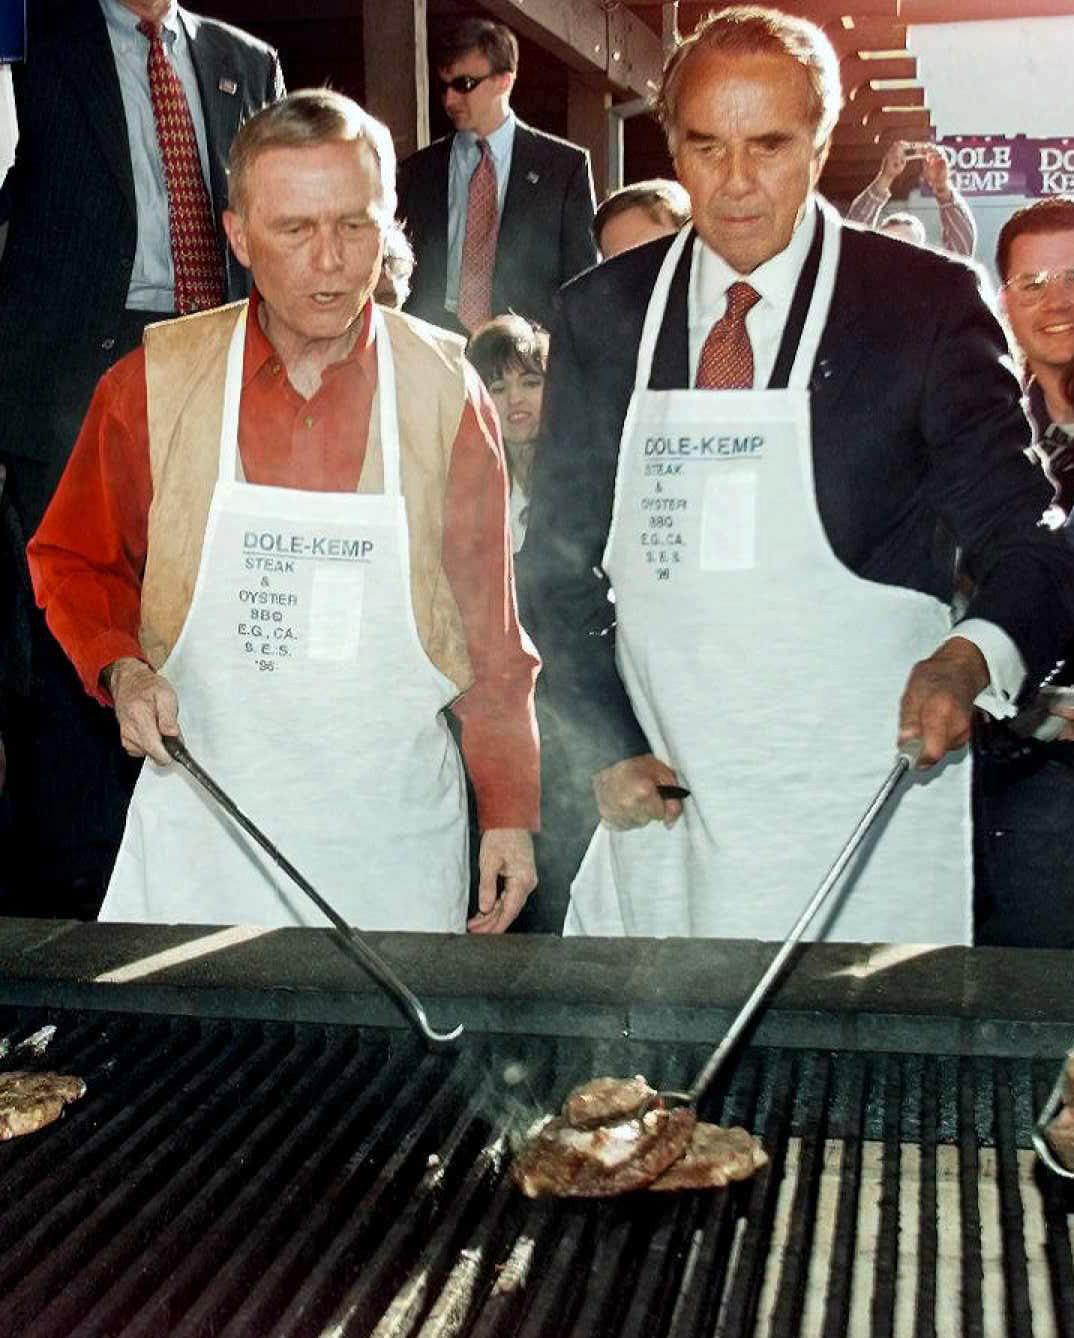 Republican presidential candidate Bob Dole and California Governor Pete Wilson grill a steak during the annual Republican steak and Oyster Feed in Sacramento, California, 27 October 27, 1996. Dole is in the middle of a three day campaign trip through California.